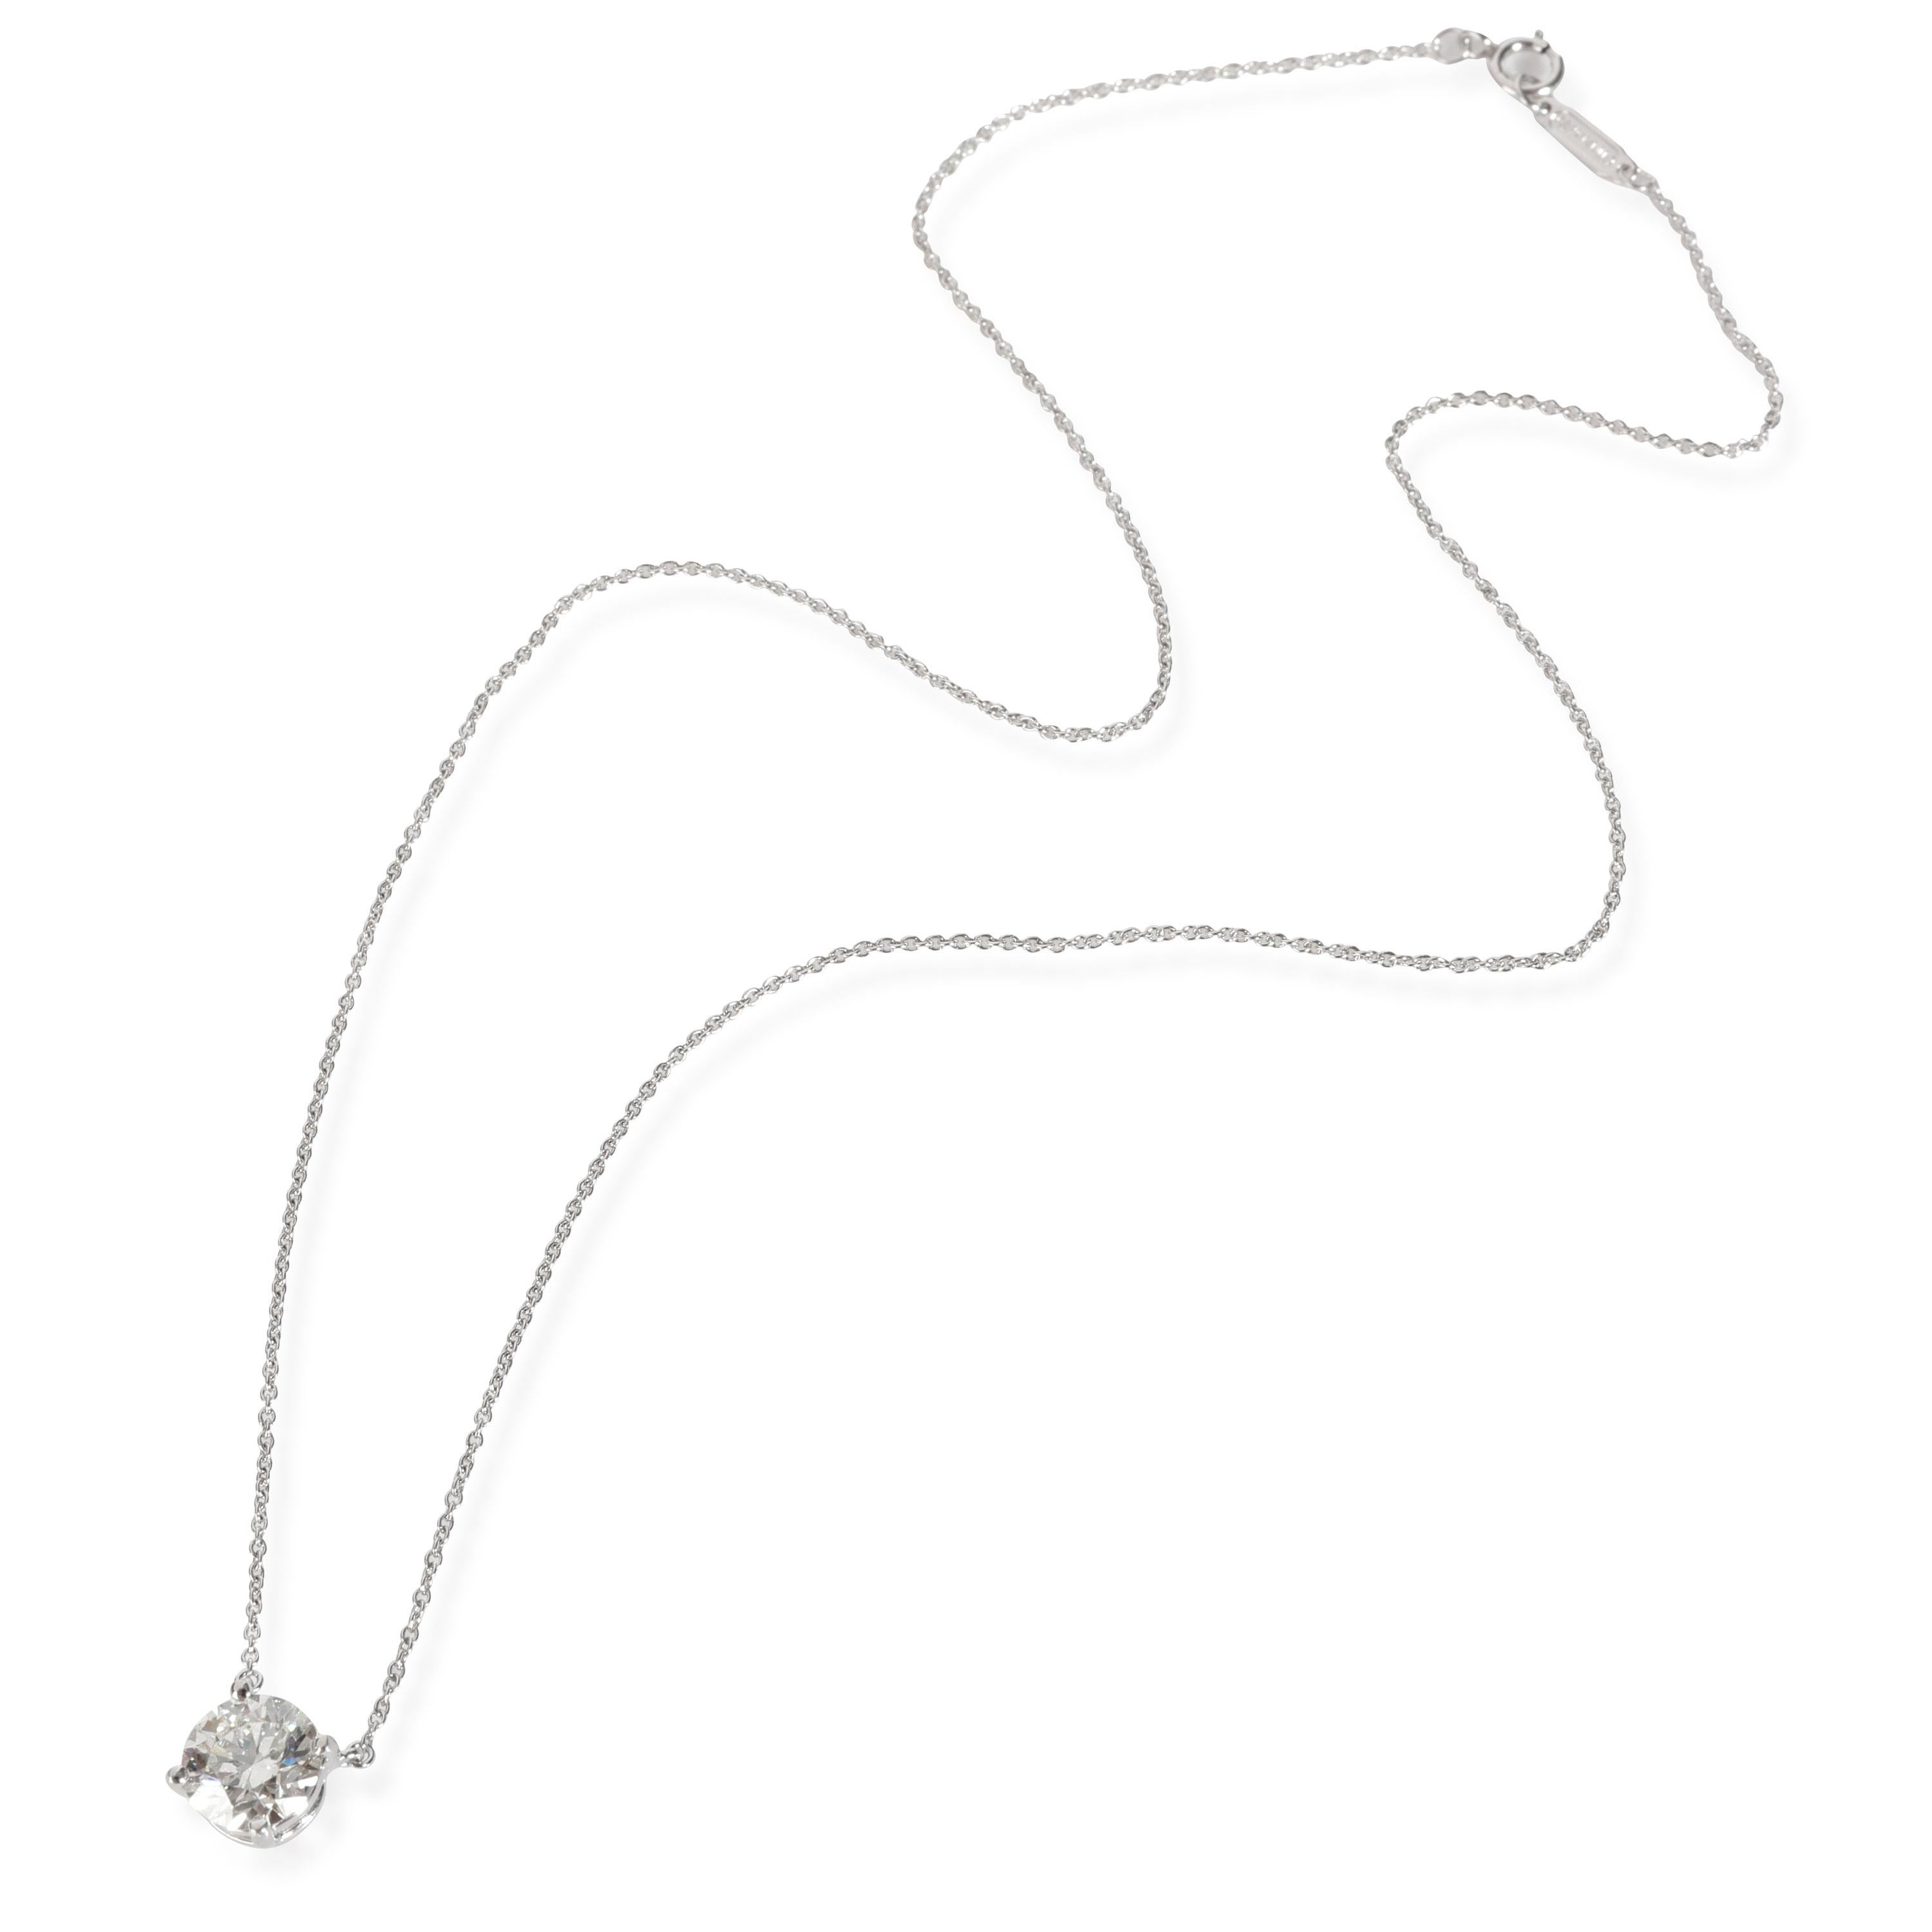 Tiffany & Co. Diamond Solitaire Pendant in platinum Platinum J IF 1.63 CTW

PRIMARY DETAILS
SKU: 113001
Listing Title: Tiffany & Co. Diamond Solitaire Pendant in platinum Platinum J IF 1.63 CTW
Condition Description: Retails for 19,300 USD. In